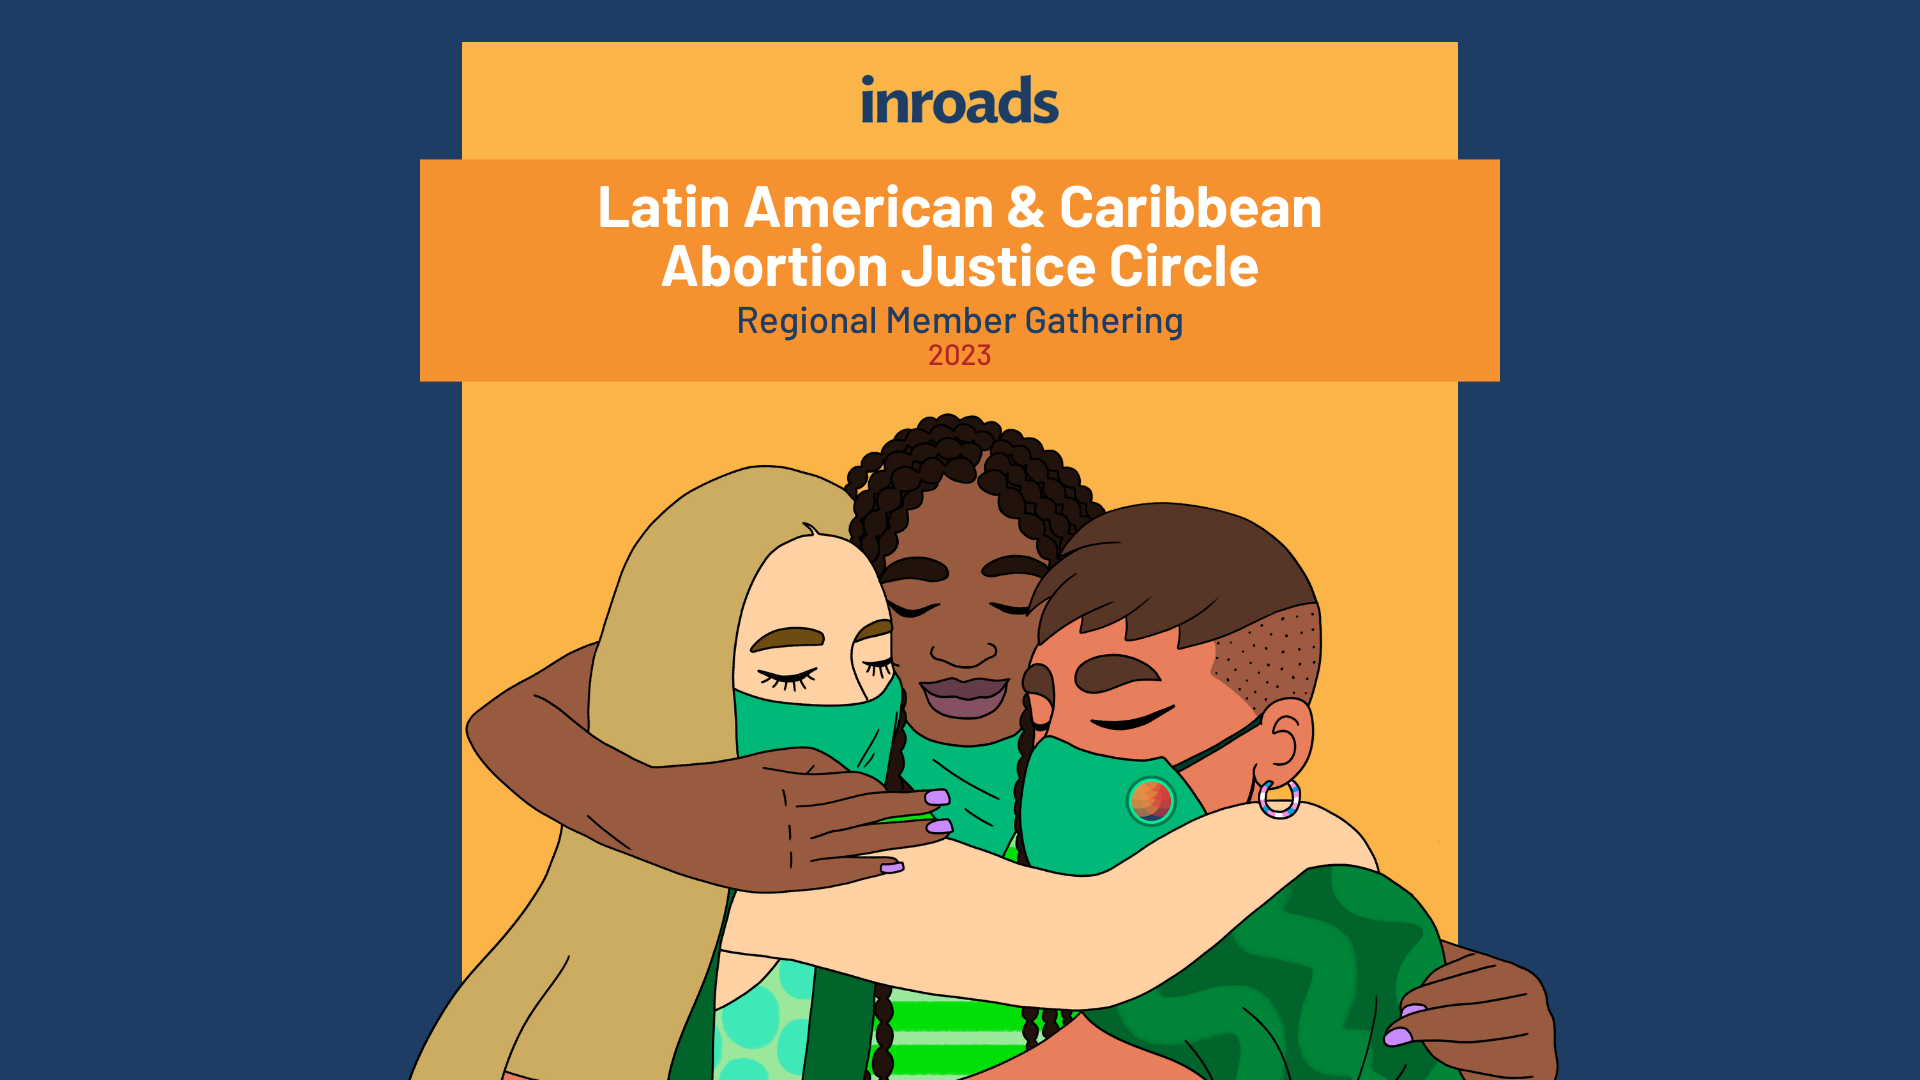 inroads Latin American and Caribbean Abortion Justice Circle. Regional Members Gathering. 2023. Three abortion activists wearing green bandanas embrace in a hug.